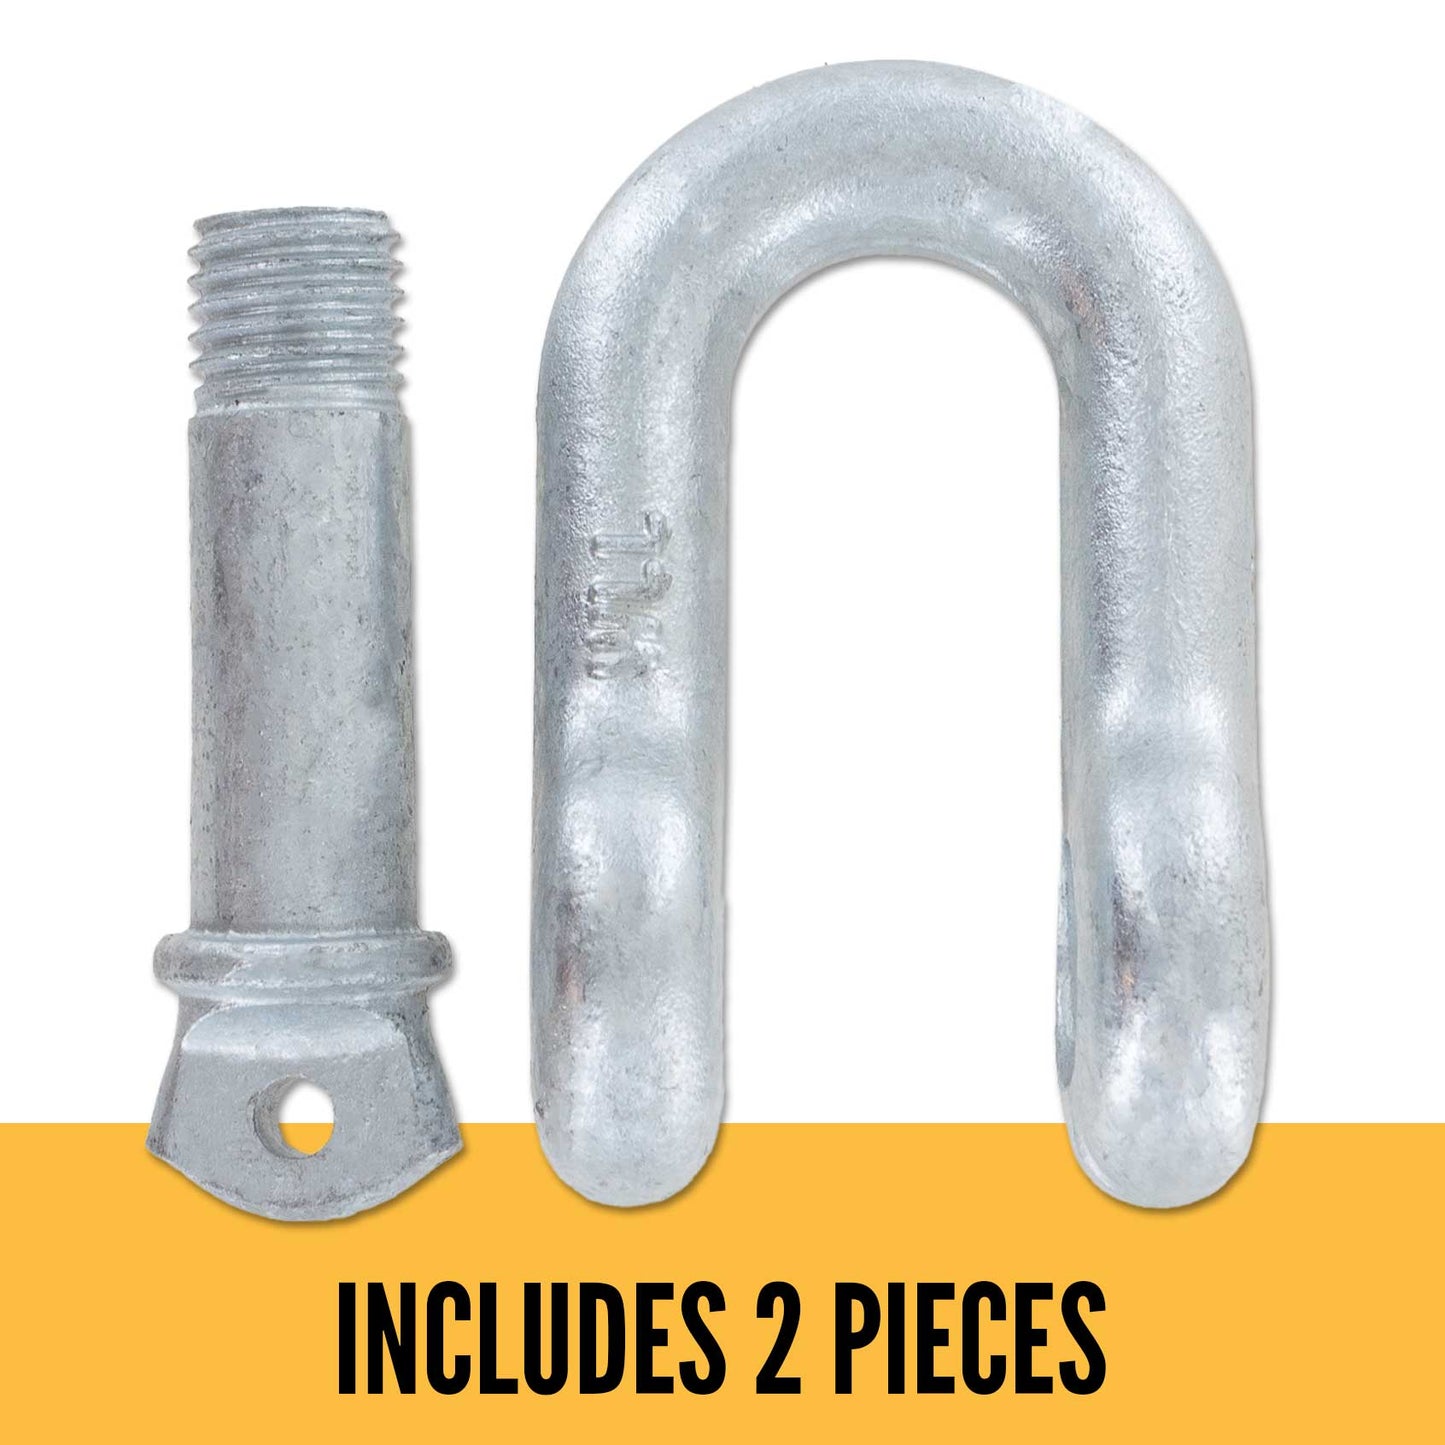 1/2" Galvanized Screw Pin Chain Shackle - 2 Ton parts of a shackle